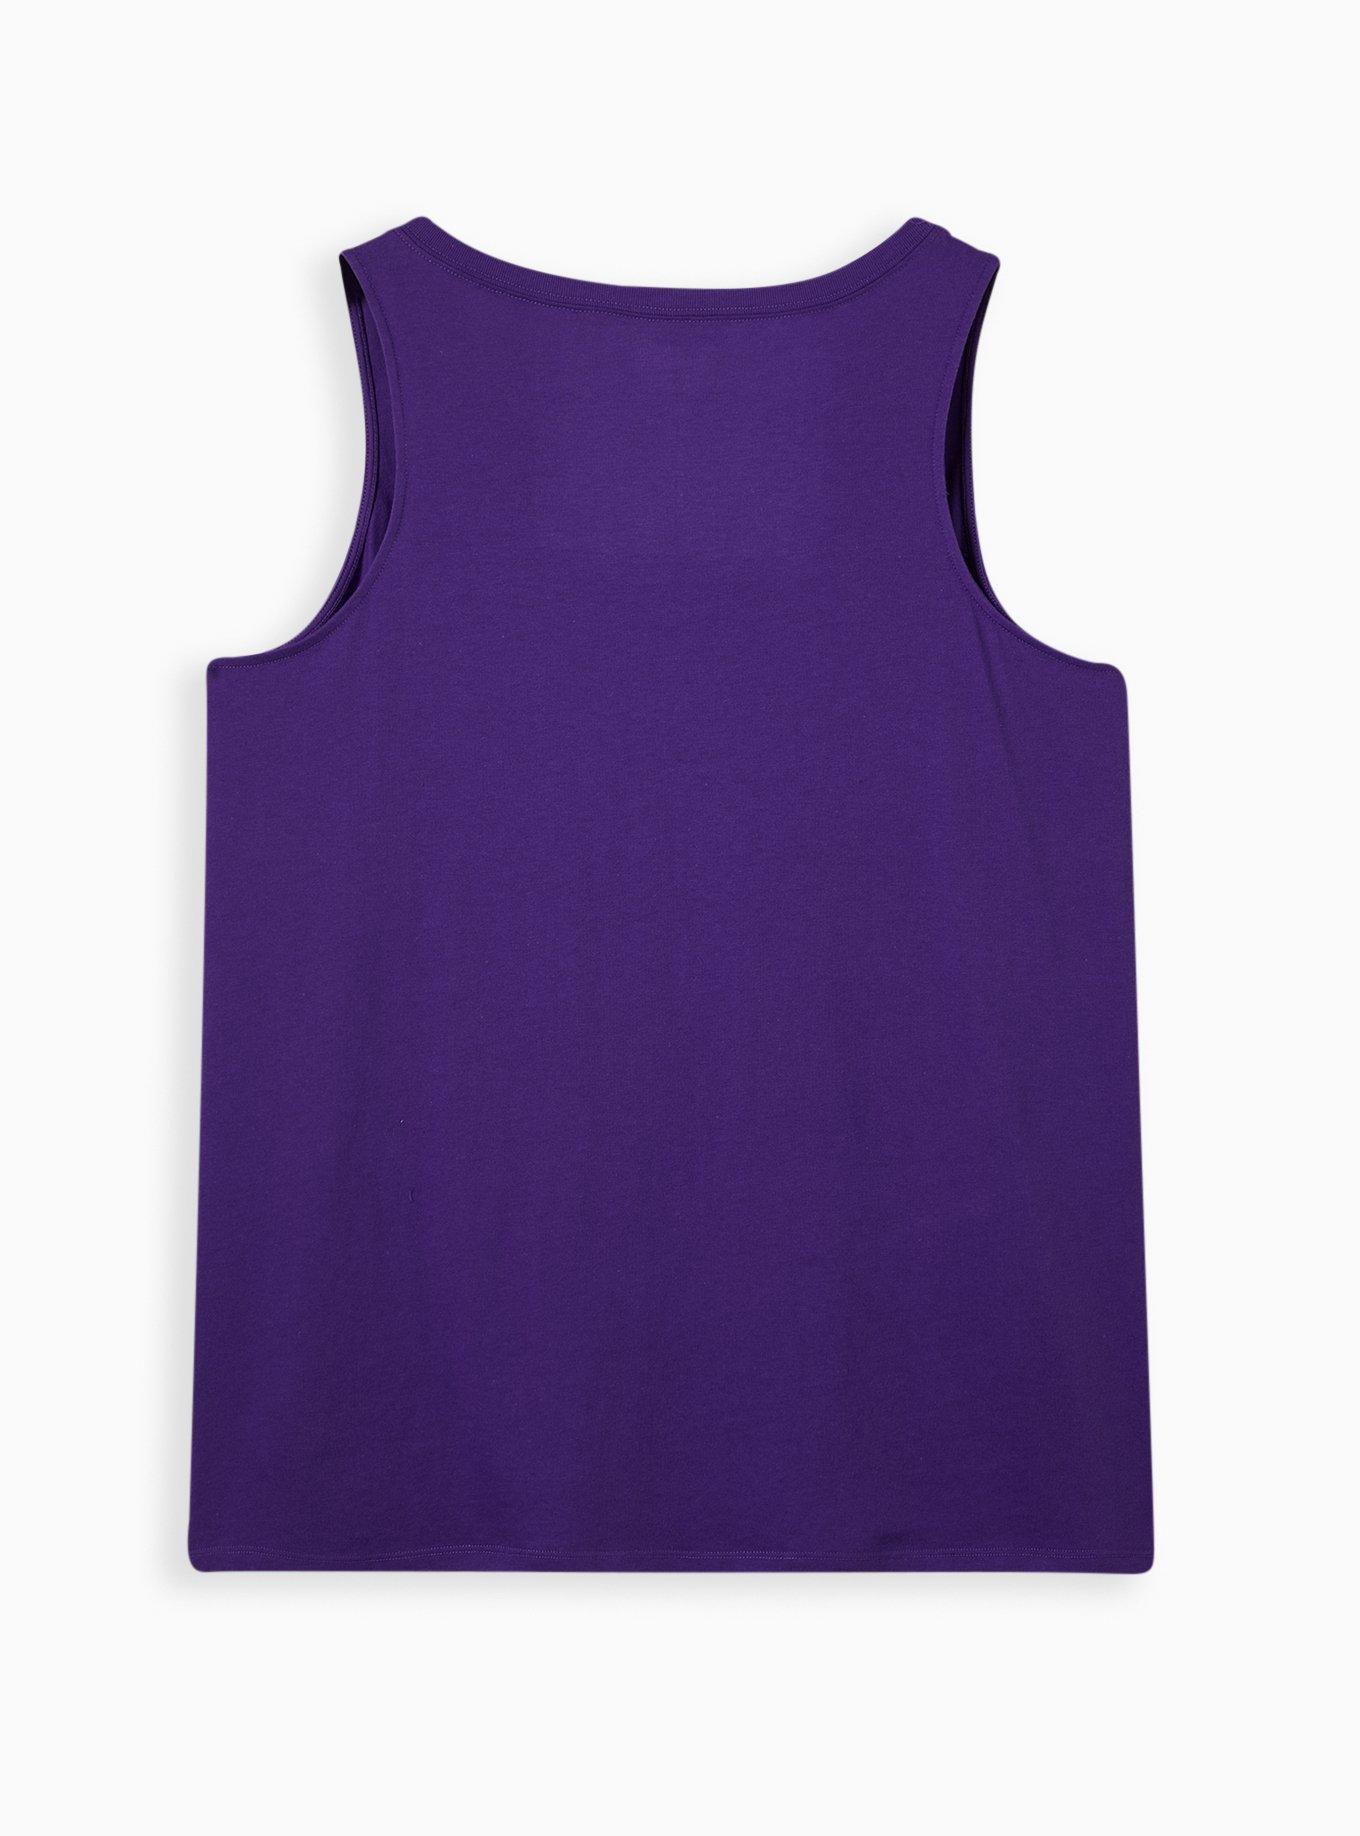 Colorado Rockies Blank White Sleeveless Jersey on sale,for Cheap